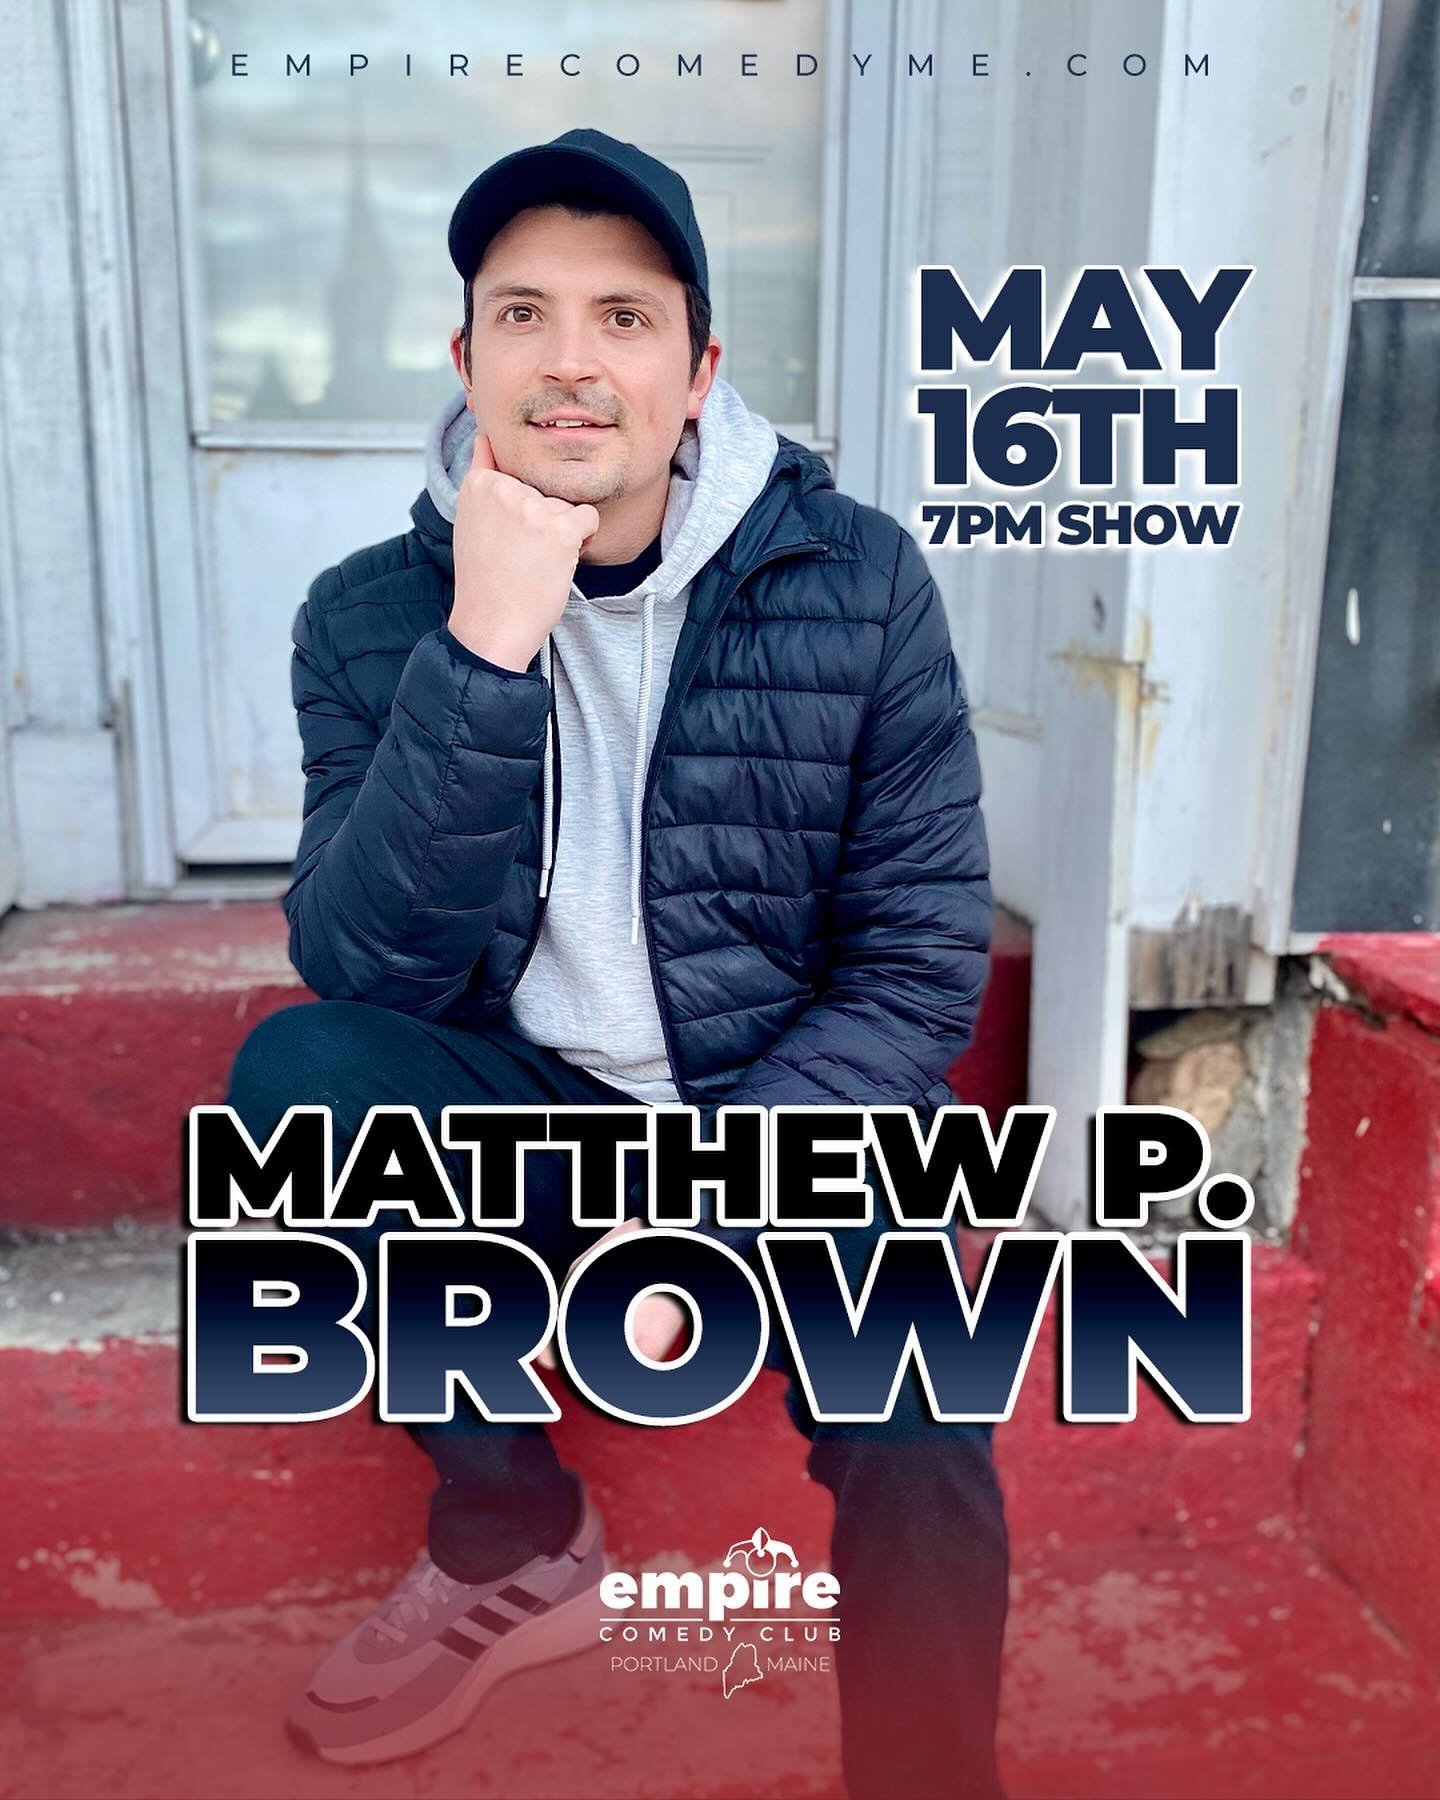 TONIGHT! THU 5/16.  TWO SHOWS! At 7pm we have @mattpbrown headlining! Following that at 8:30, we have our WEEKLY OPENmic hosted by @benjaminchadwick. Doors at 6pm!
&bull;
#empirecomedyclub #comedyclub #maine #portlandmaine #thingstodoinmaine #comedyi